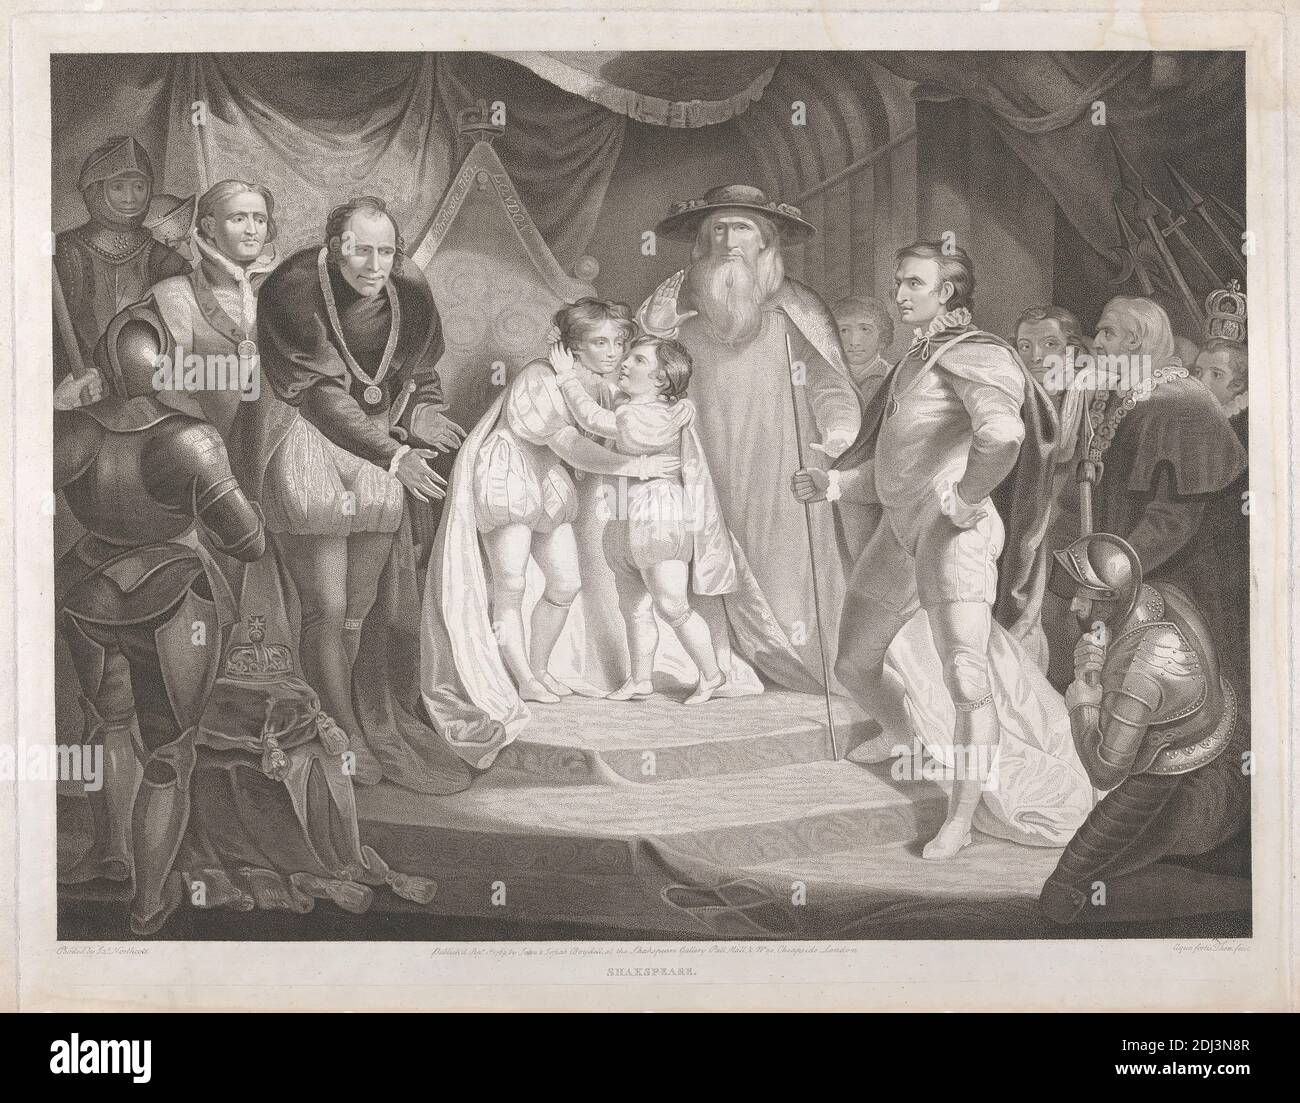 King Richard III: Act III, Scene I (The Meeting of Edward V and His Brother, Richard, Duke of York), Print made by Robert Thew, 1758–1802, British, after James Northcote, 1746–1831, British, 1789, Stipple engraving and aquatint on medium, slightly textured, cream laid paper, Sheet: 20 1/8 × 29 3/8 inches (51.1 × 74.6 cm), Plate: 19 3/4 × 24 3/4 inches (50.2 × 62.9 cm), and Image: 17 3/8 × 23 1/4 inches (44.1 × 59.1 cm), armor, brothers, children, embrace, literary theme, princes, Richard III, play by William Shakespeare, royalty, soldiers Stock Photo